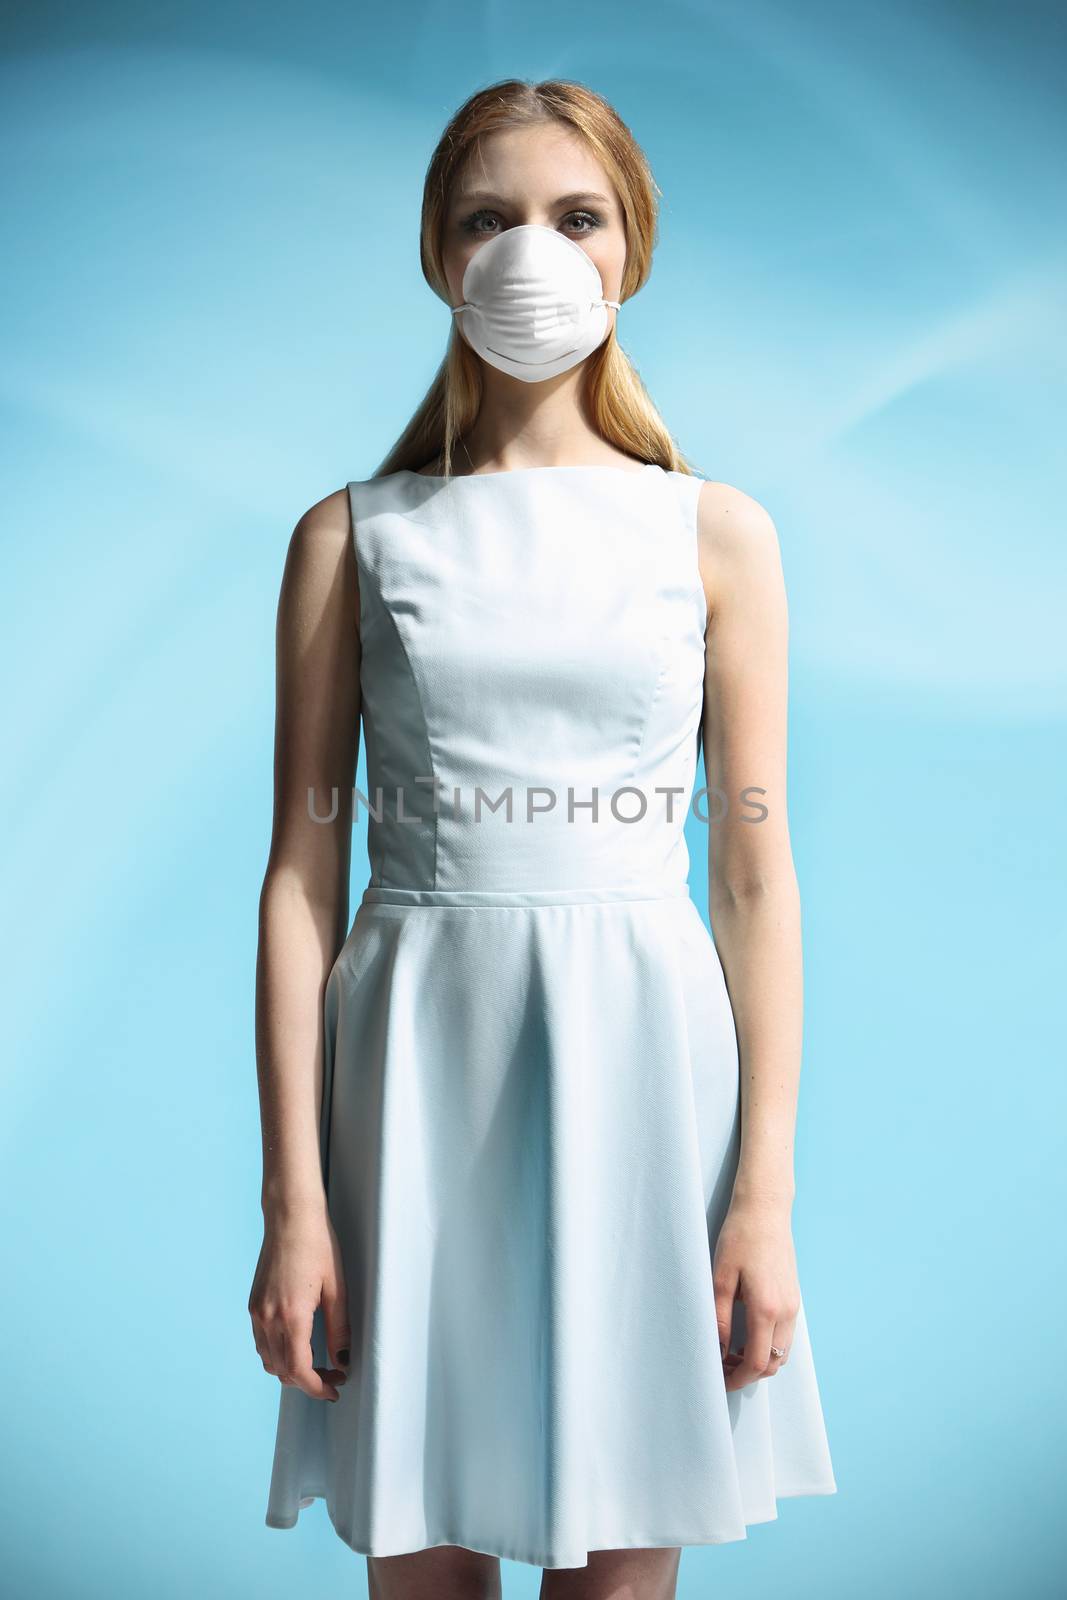 Beautiful girl in a white dress with a respiratory mask on her face by robert_przybysz